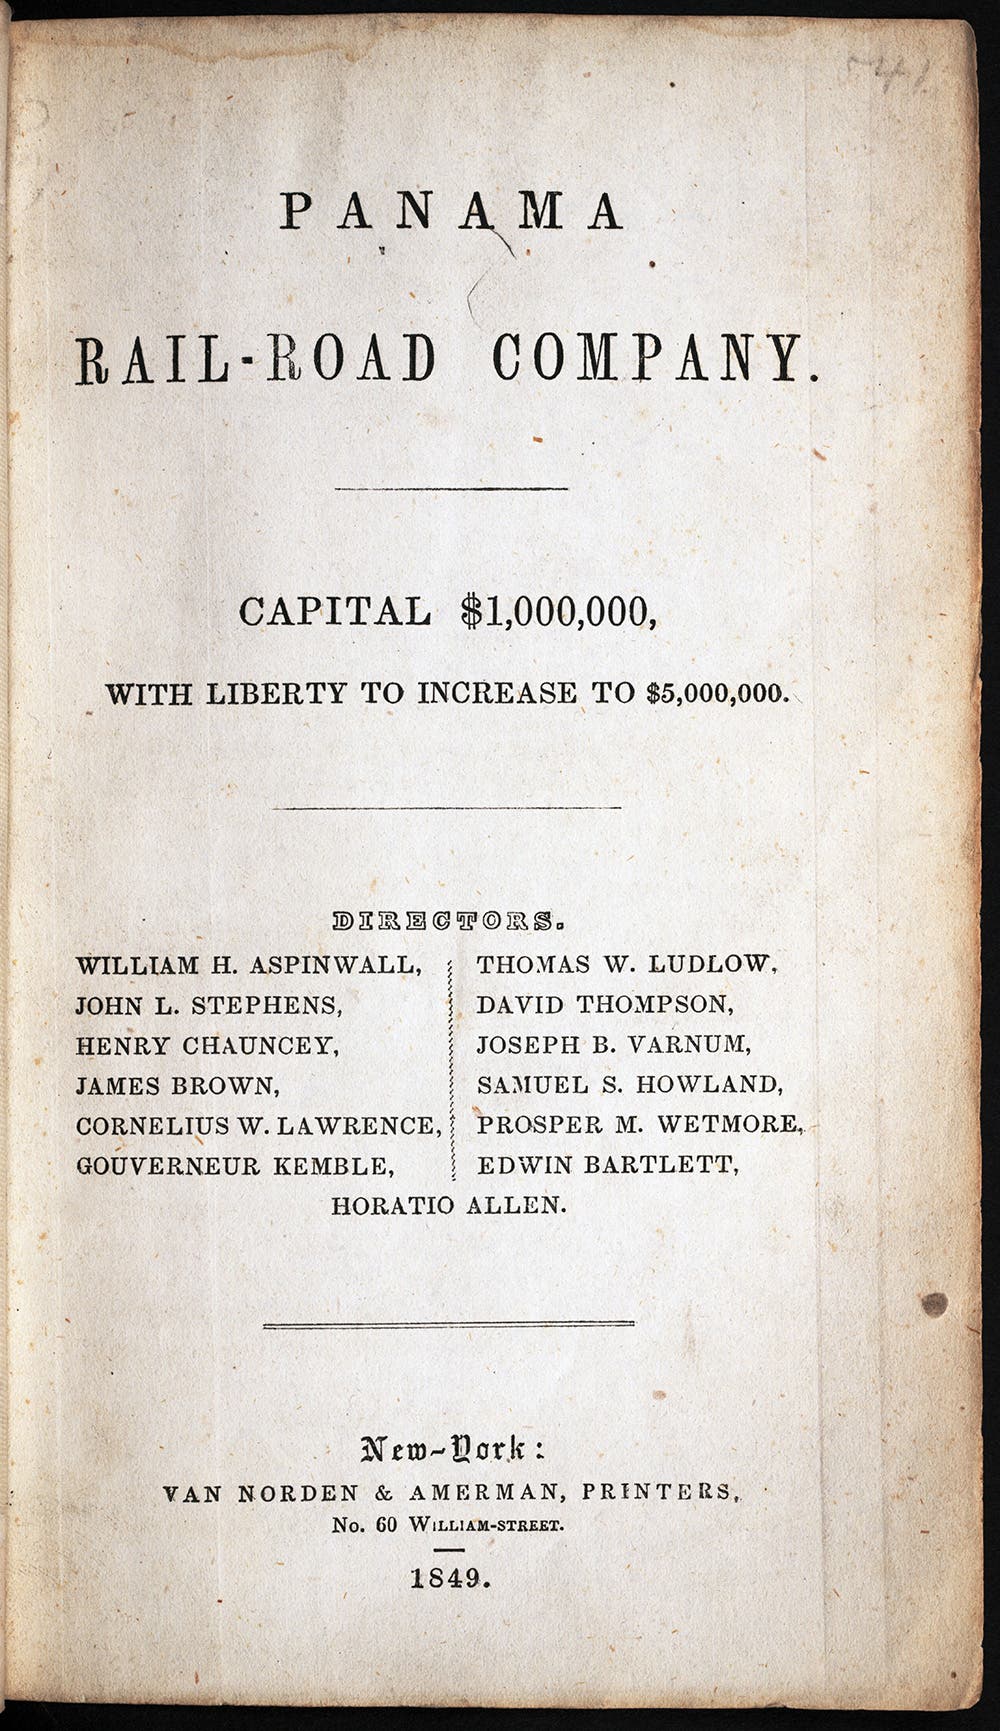 Directors of the Panama Railroad issued this proposal for the railroad with confidence after gold was discovered in California in 1848. From Pamana Rail-Road Co., Capital $1,000,000. New York, 1849.